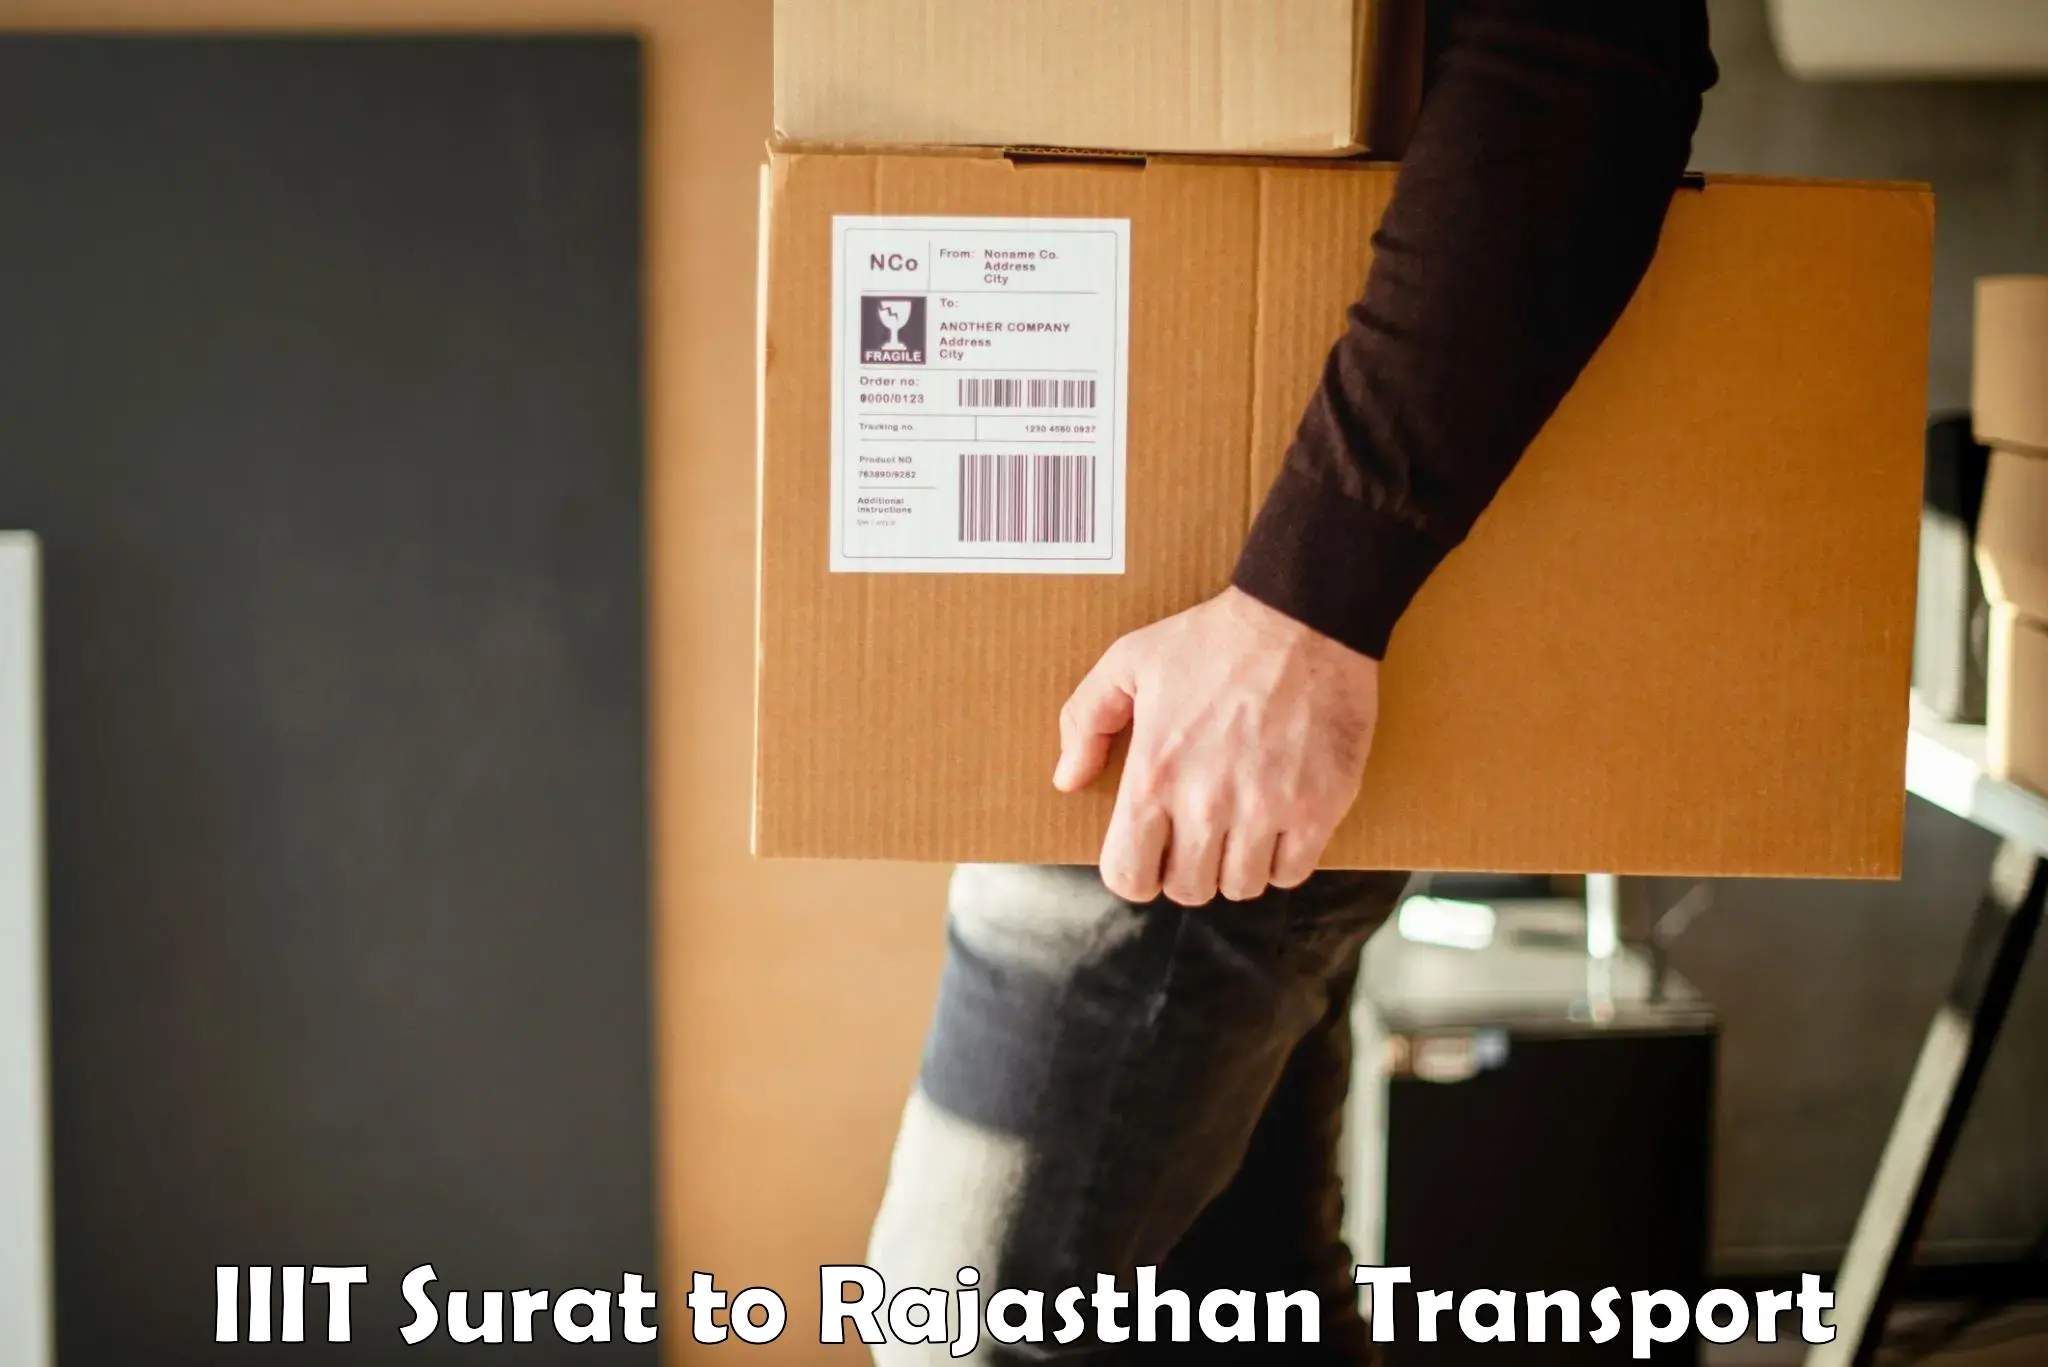 Daily parcel service transport IIIT Surat to Piparcity